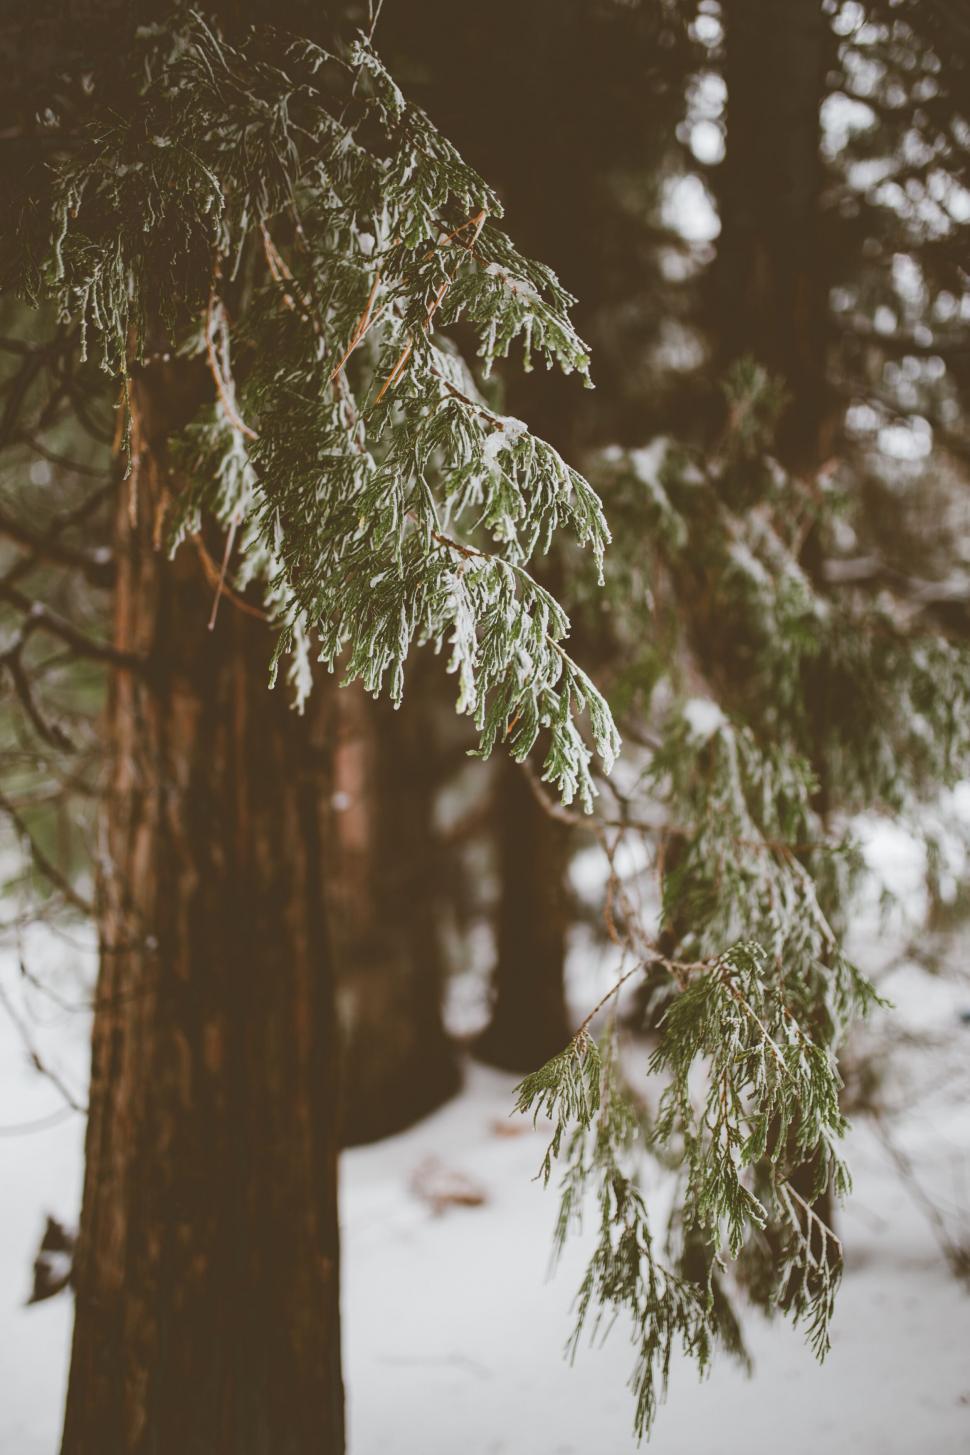 Free Image of Close-up of icy pine branches in winter 